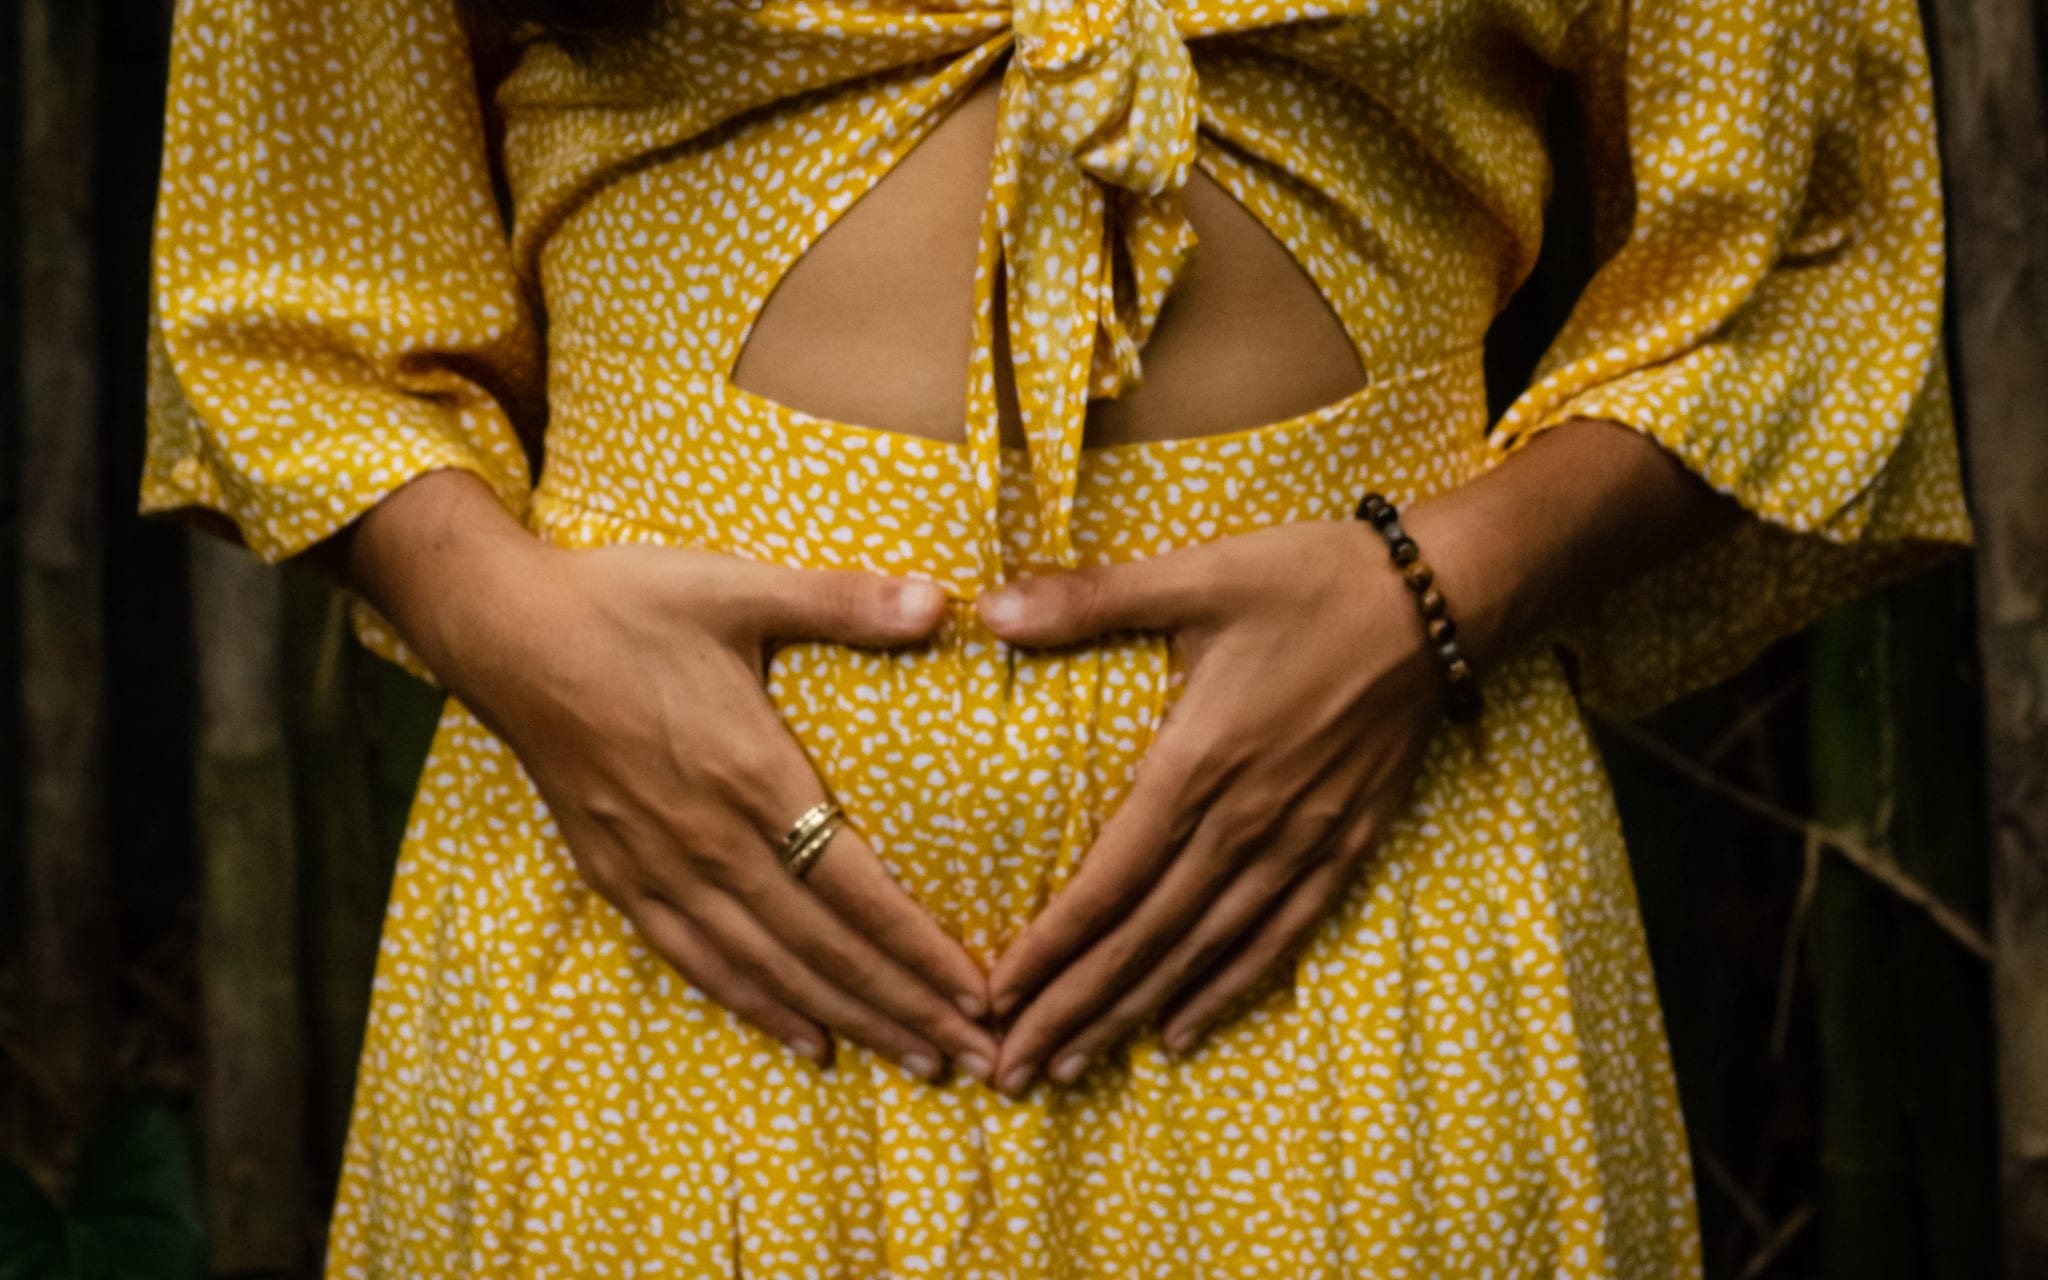 A woman's hand on her womb, expressing her gratitude for her menstrual cycle